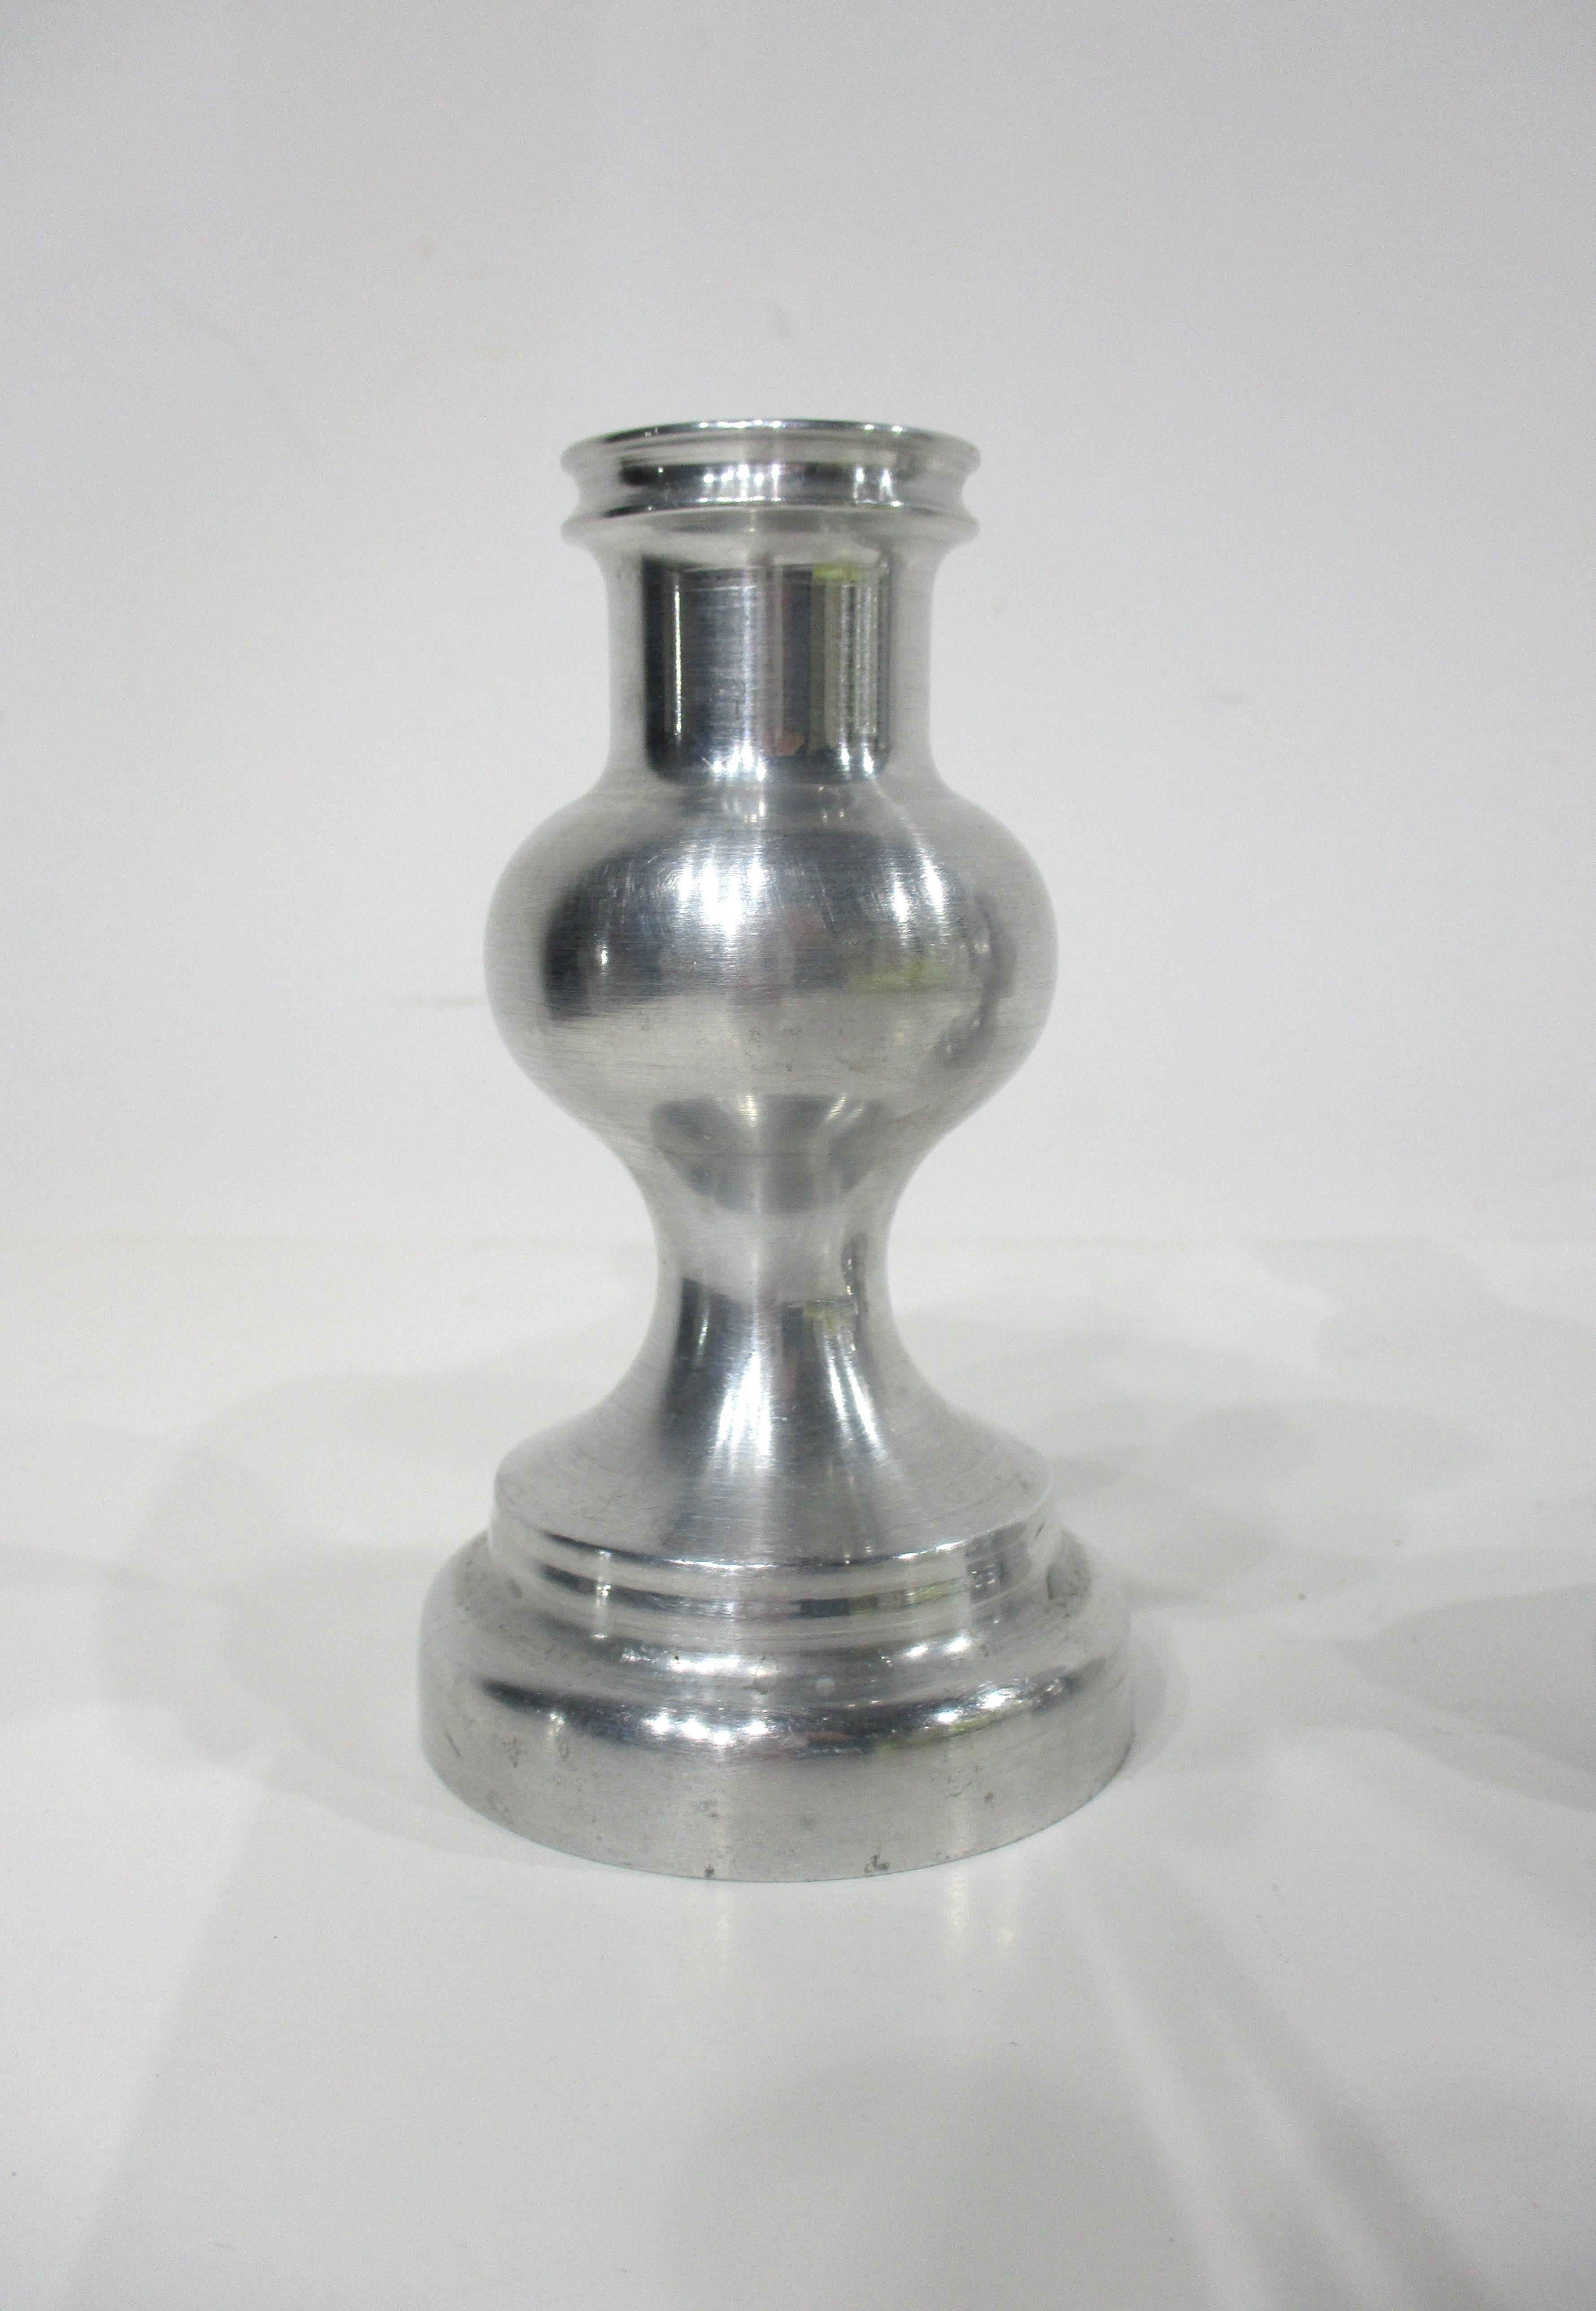 A pair of turned aluminum machine age art deco styled candlestick with nice rounded center having top and bottom details . These would fit into any style of interior from mid century , art deco or where you need some simple form to accent you space